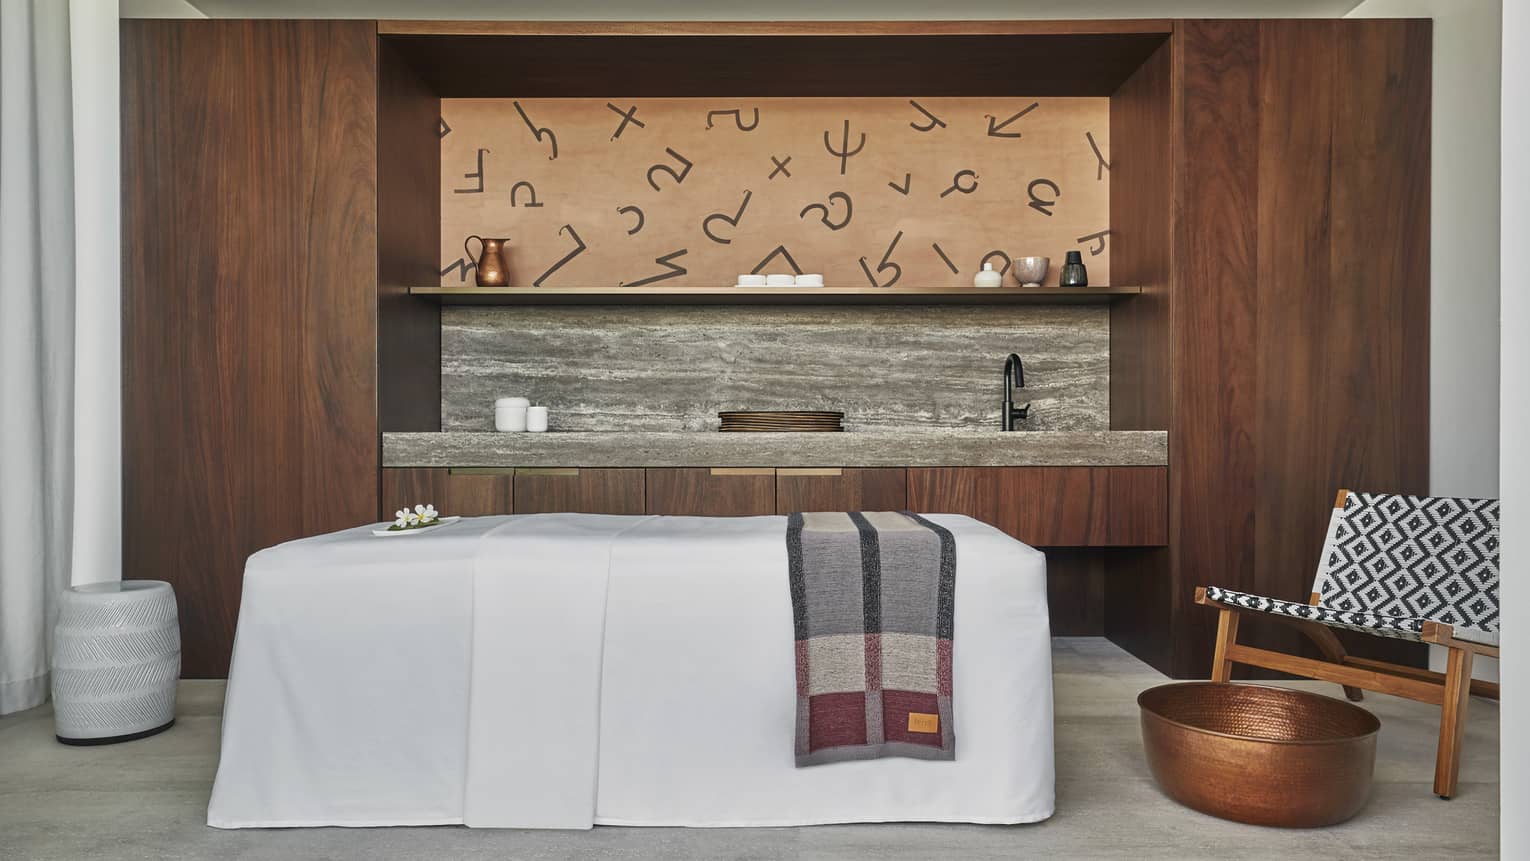 A Four Seasons Resort Los Cabos spa room is decorated with a walnut wooden accent wall with a gray concrete shelf, a mid century modern chair with a blue and white tribal pattern and a massage table covered with a white cloth 